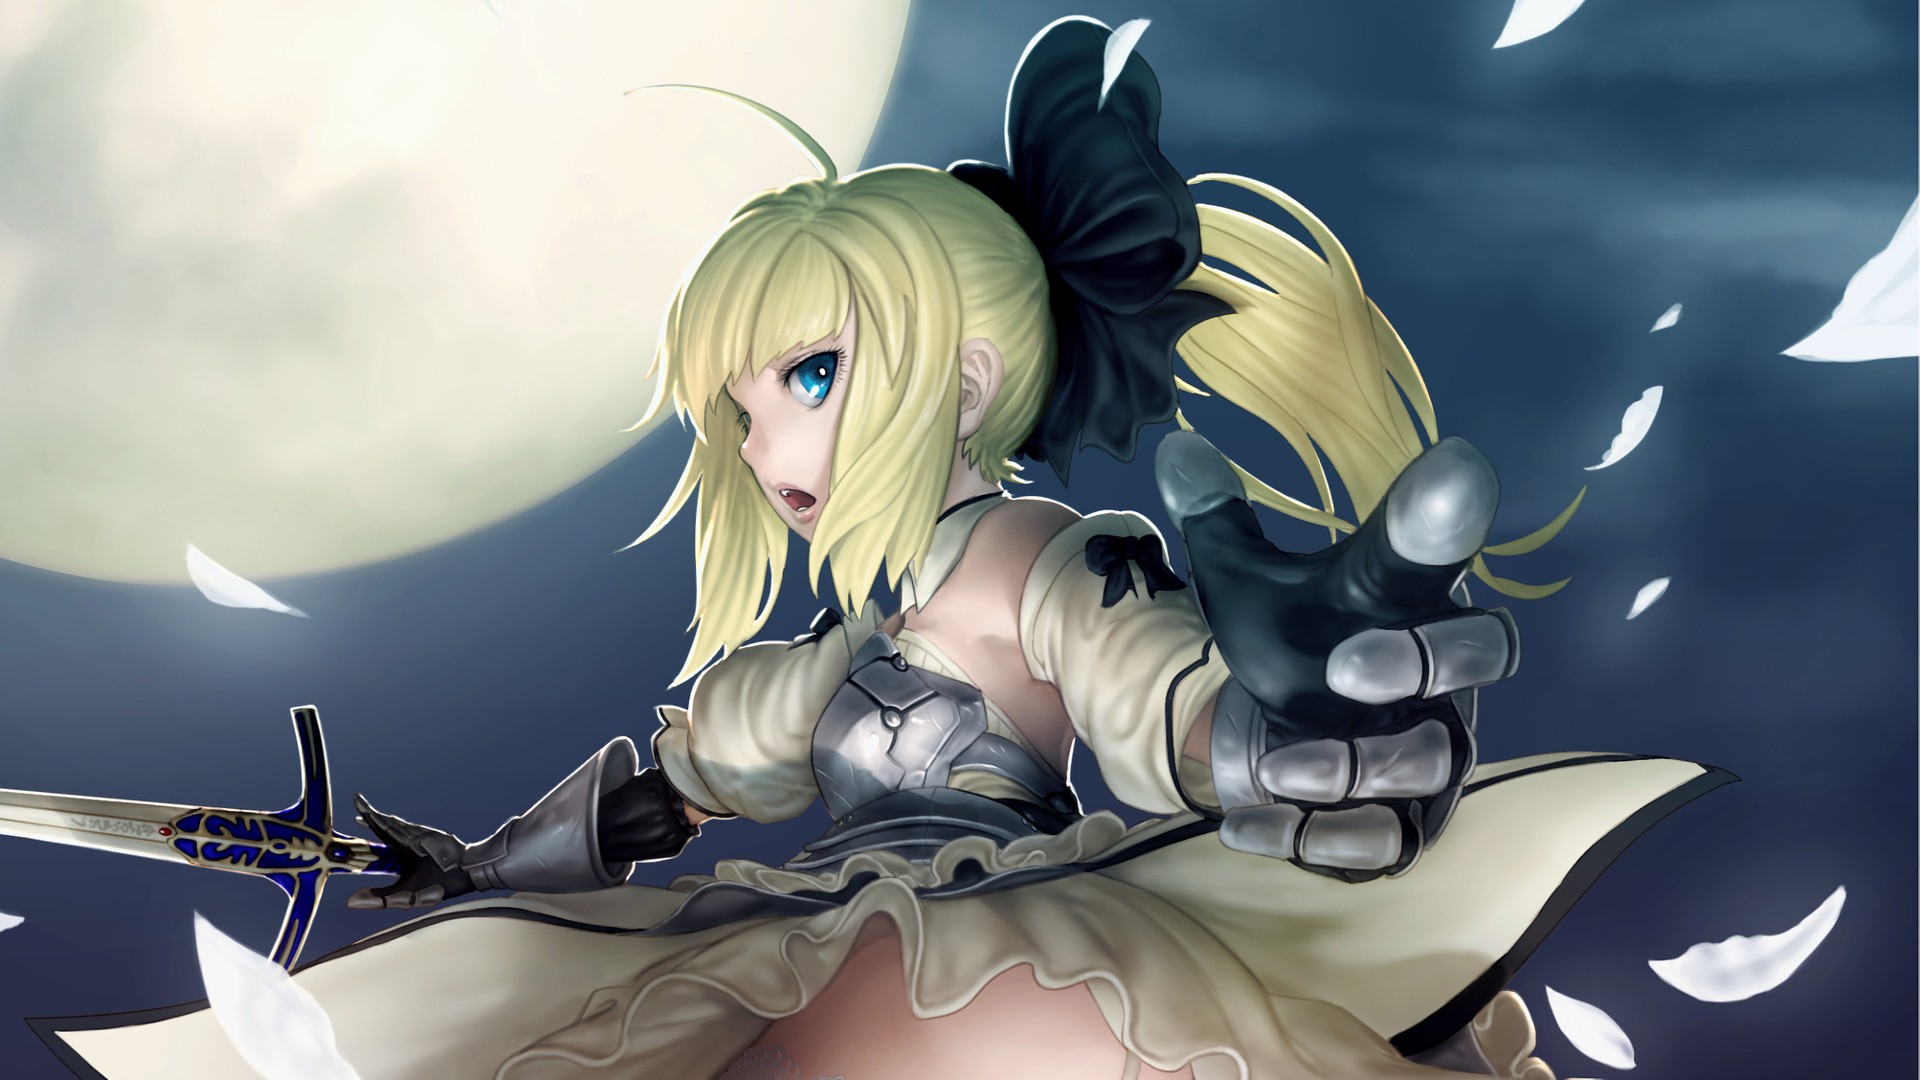 Anime 1920x1080 anime anime girls Fate series Saber Saber Lily women with swords sword weapon blonde fantasy art fantasy girl